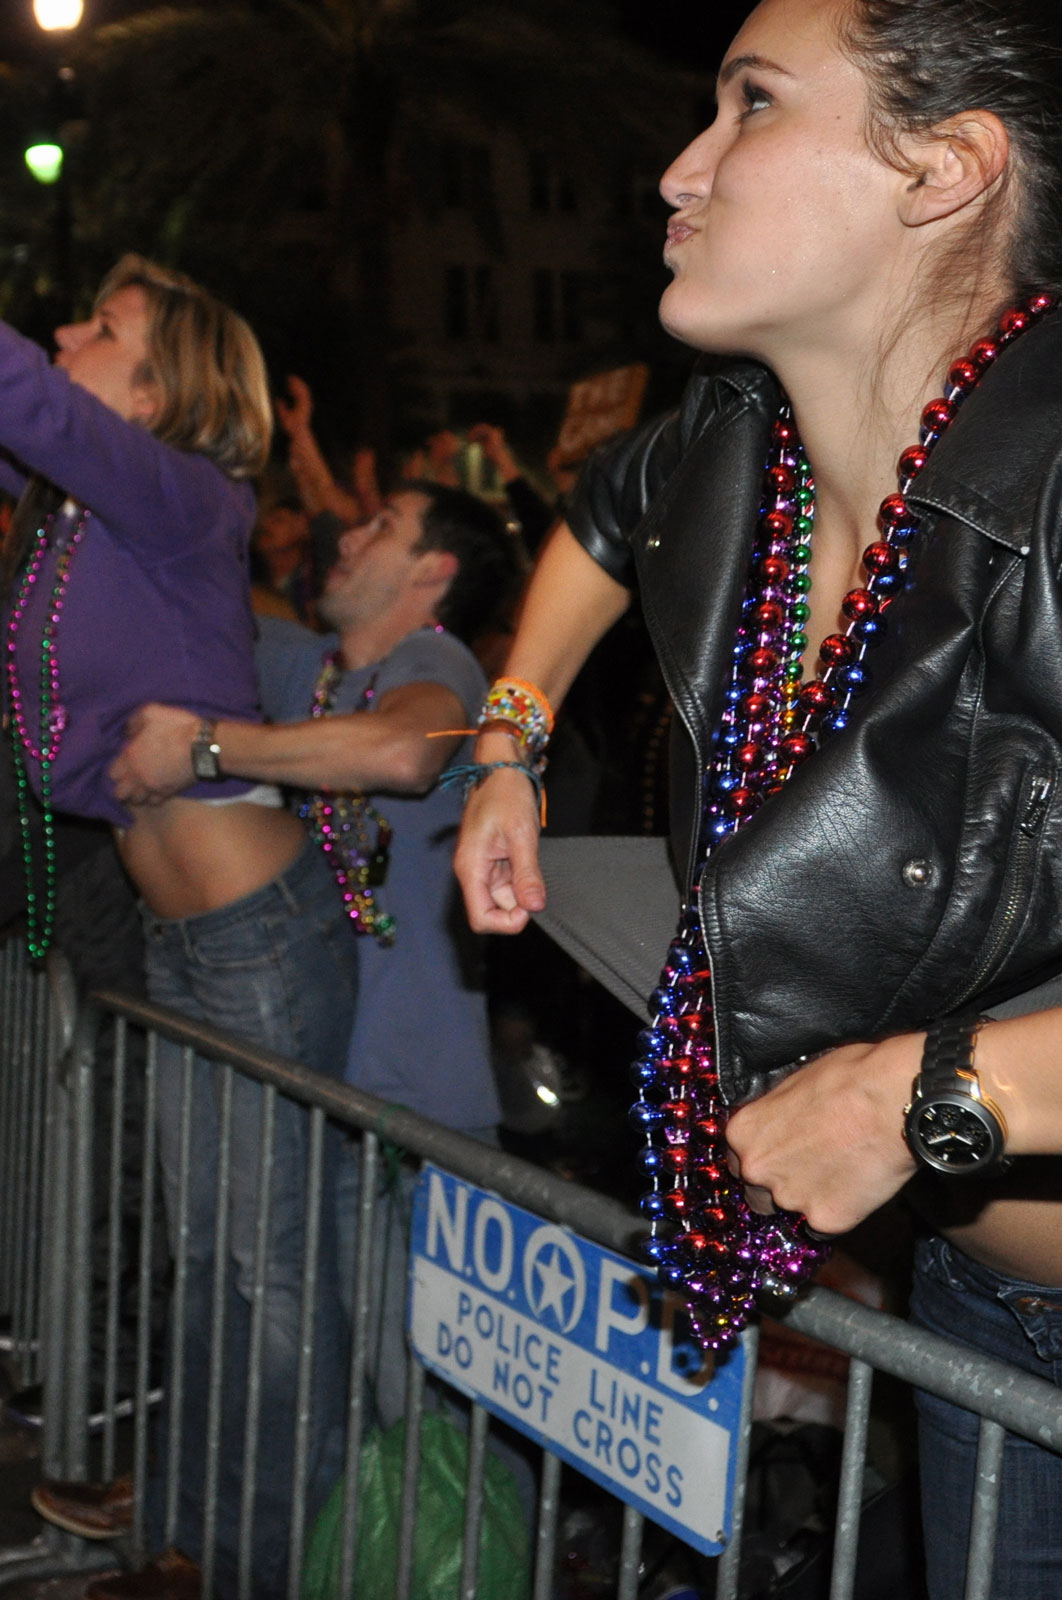 colleen chamberlain recommends flashing at mardi gras pic